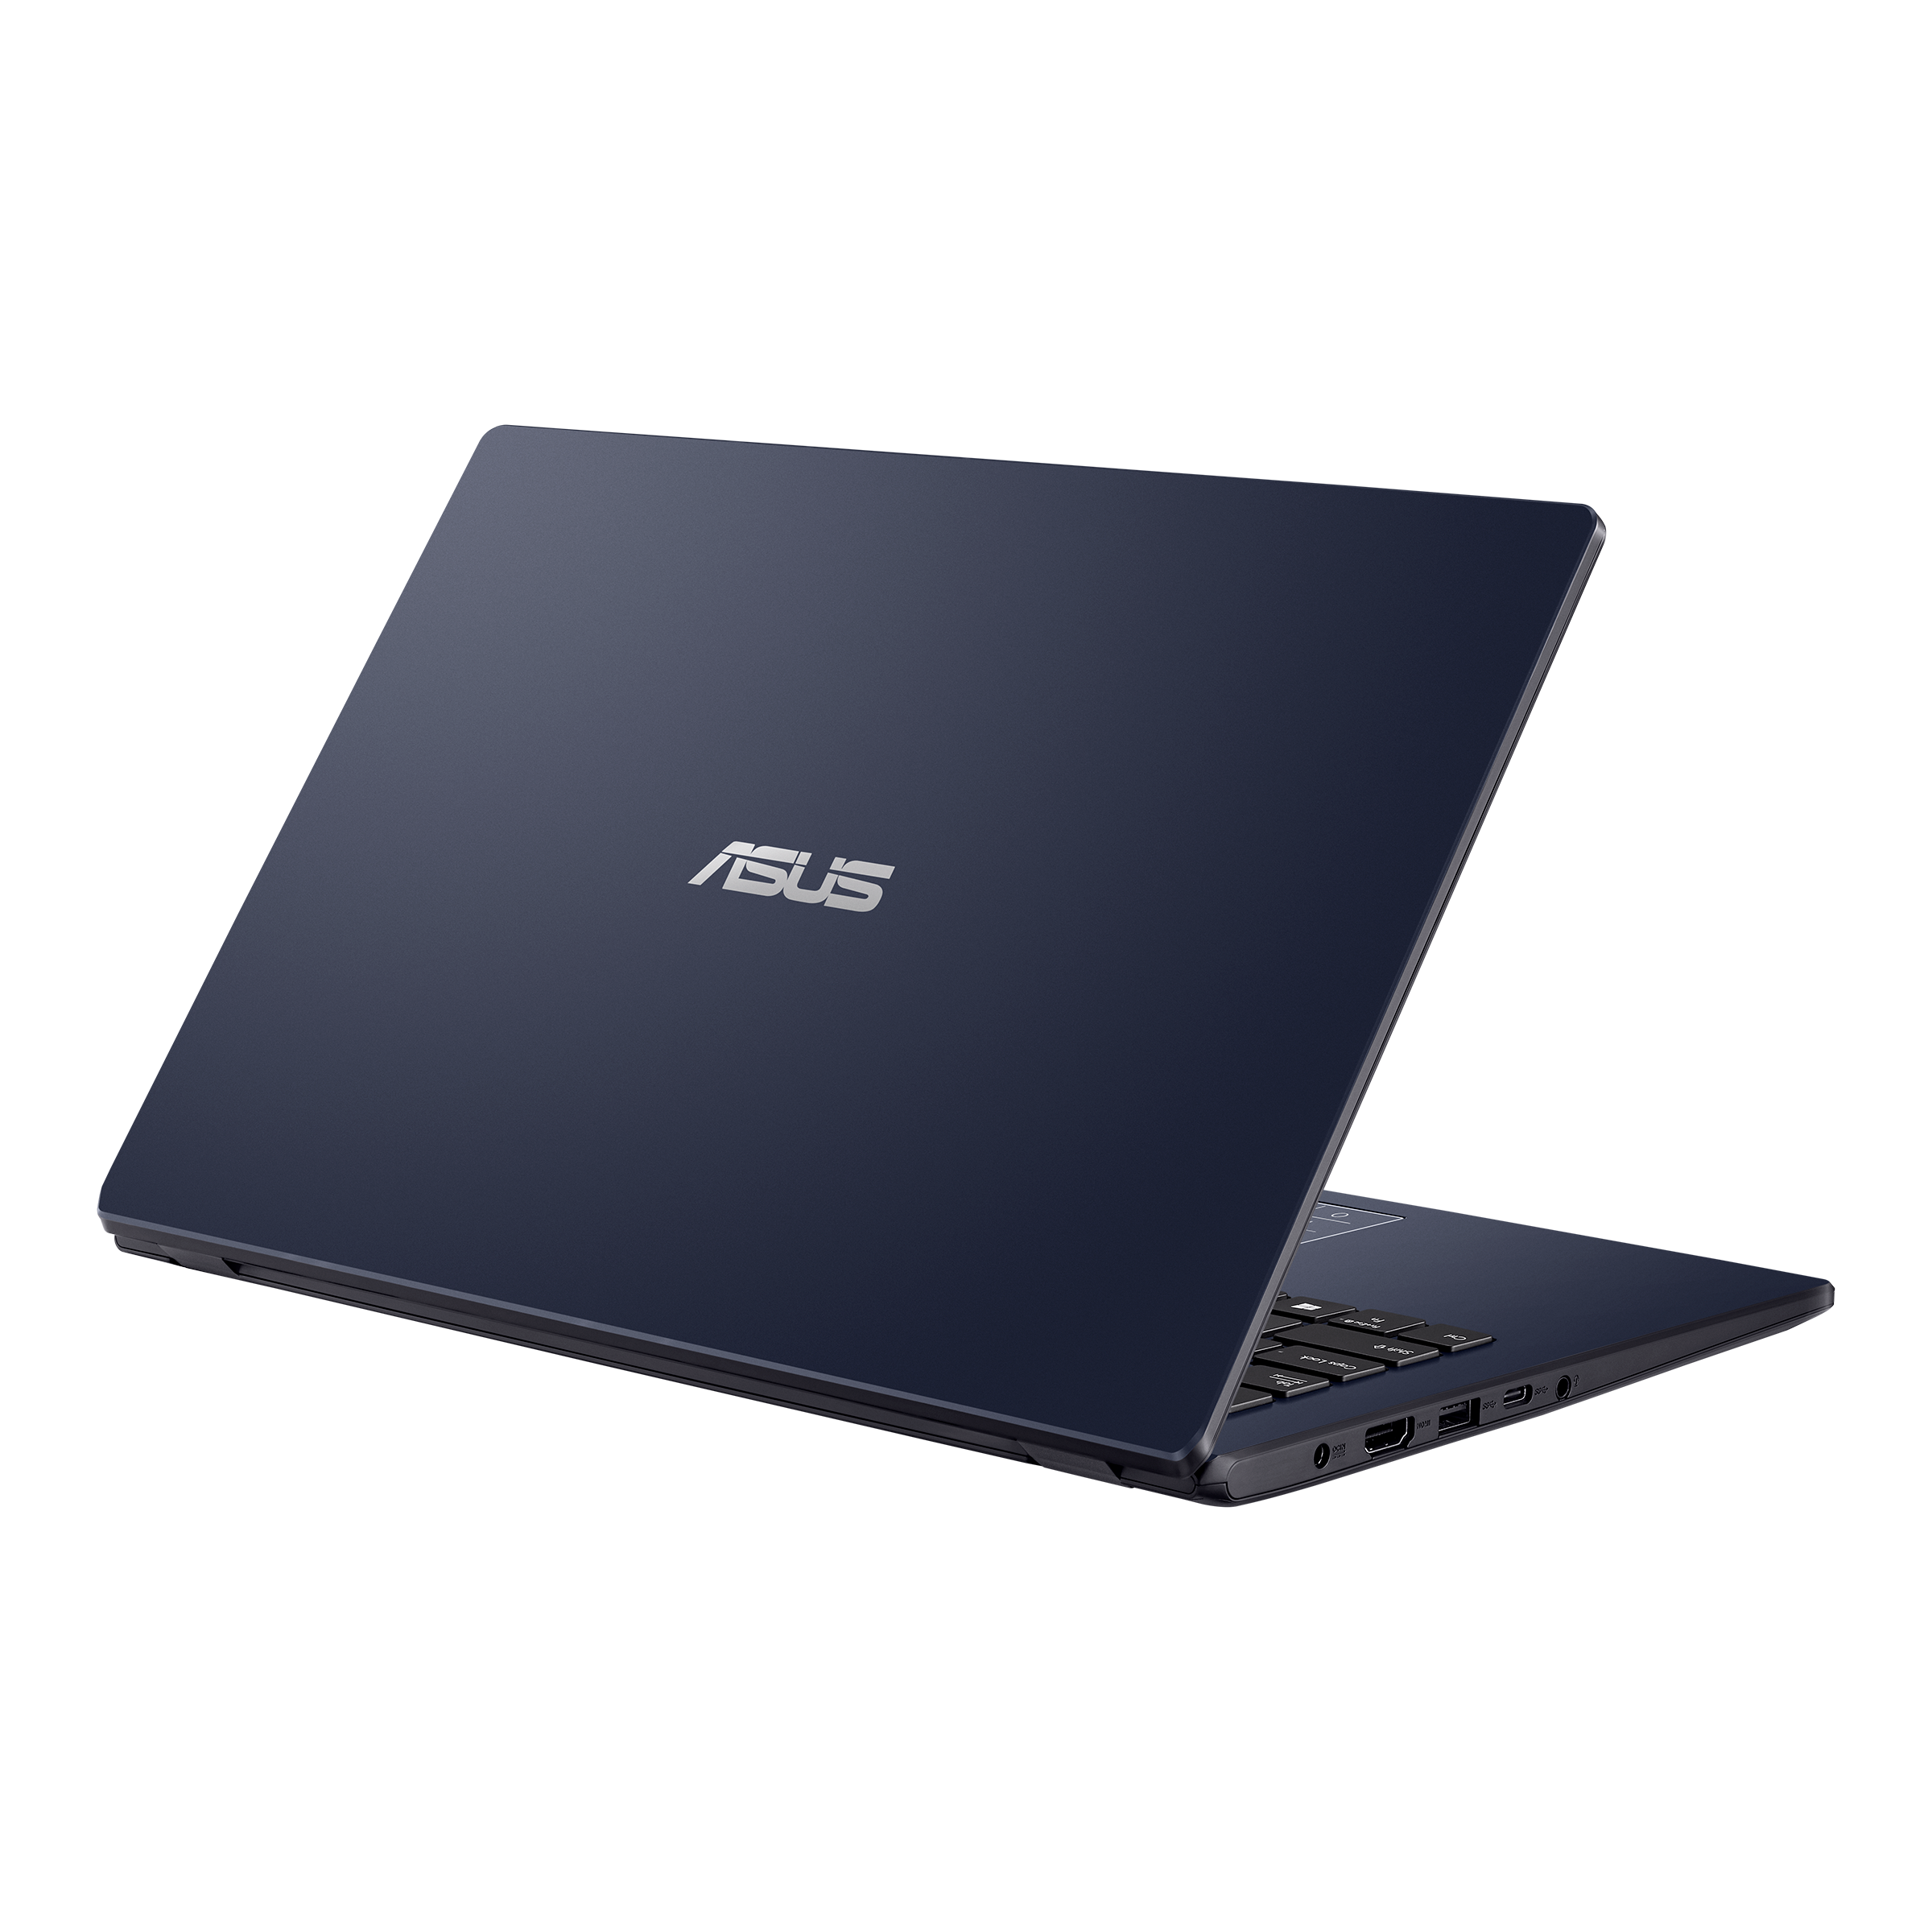 ASUS E410｜Laptops For Home｜ASUS Global